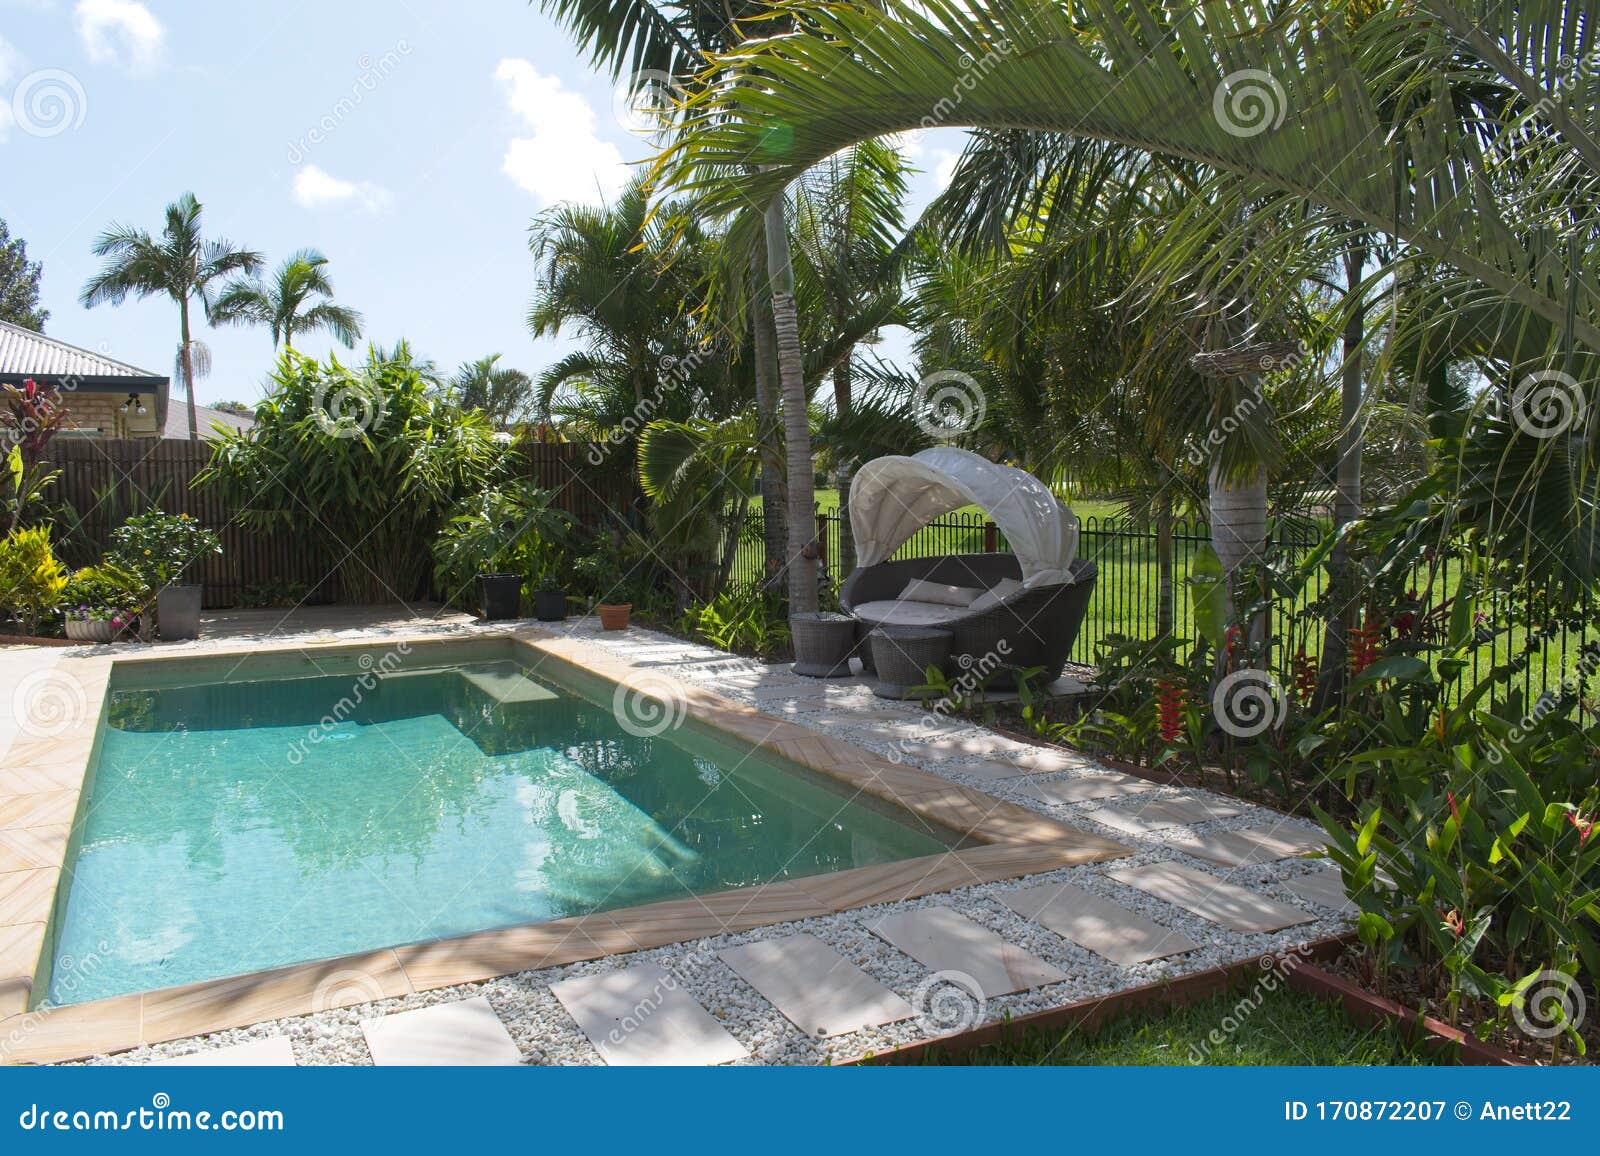 Tropical Backyard With Swimming Pool In Queensland Australia Stock Image Image Of Swimming Pool 170872207